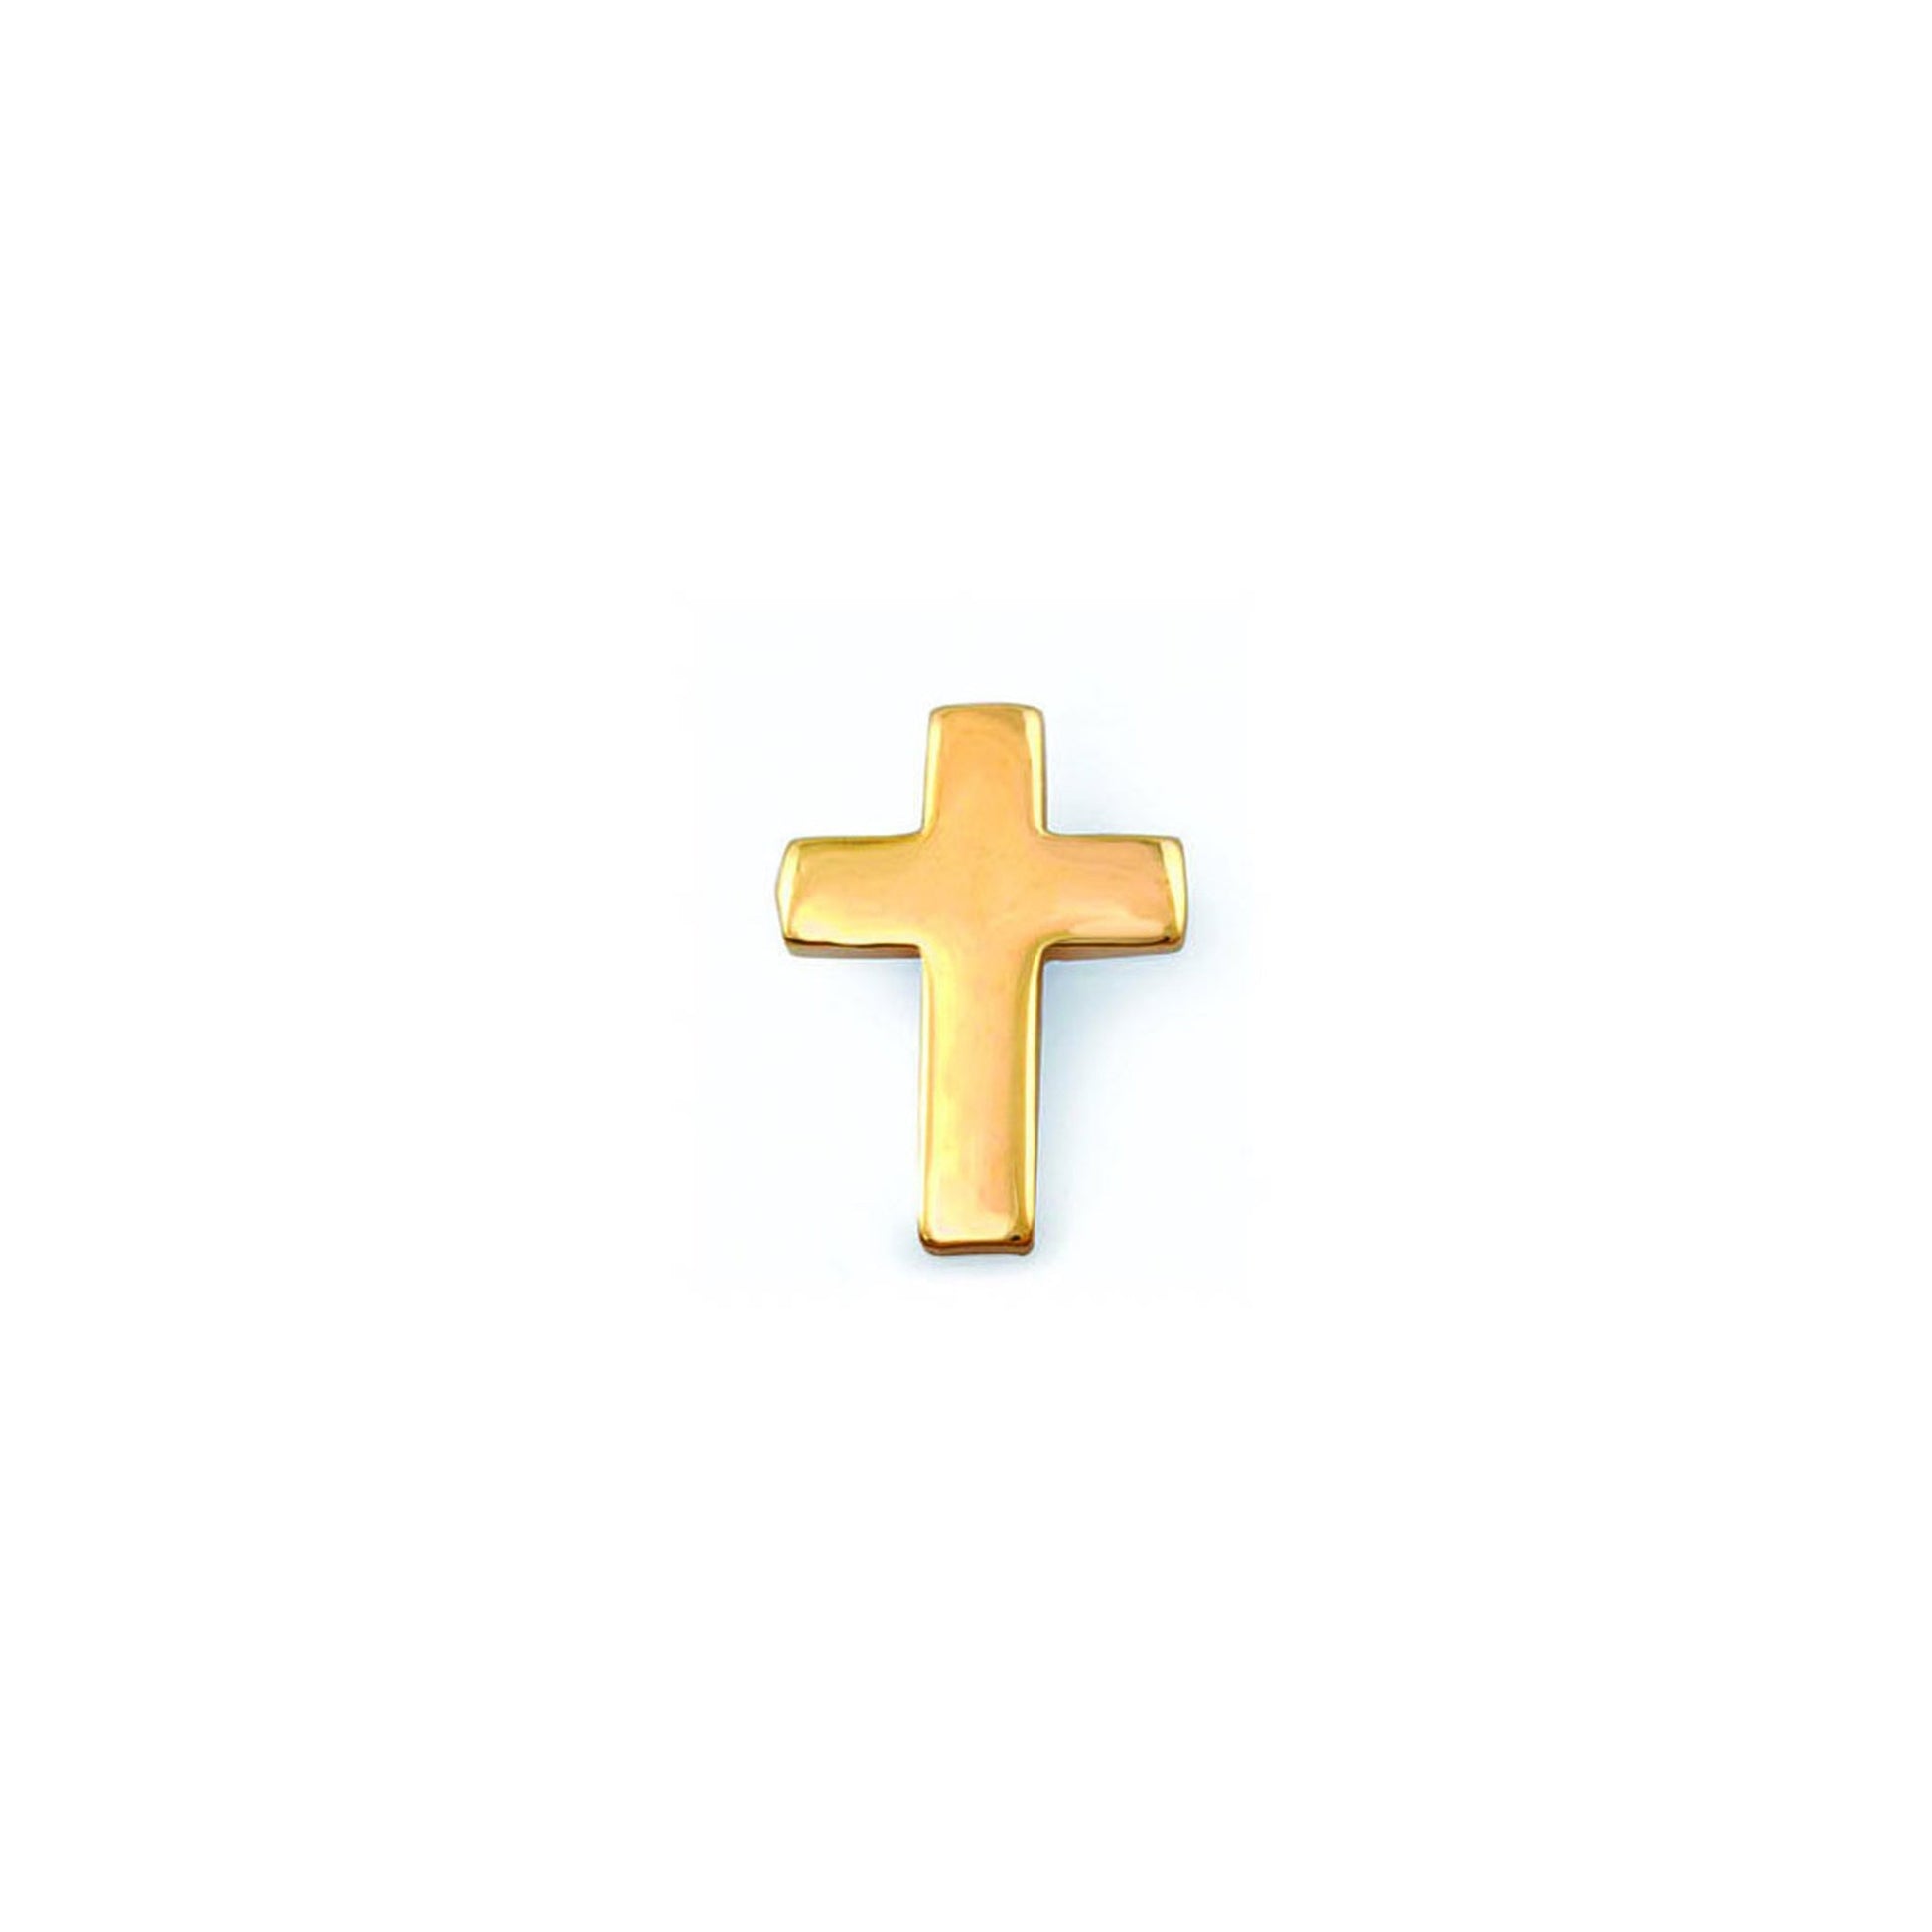 A cross tie tack displayed on a neutral white background.